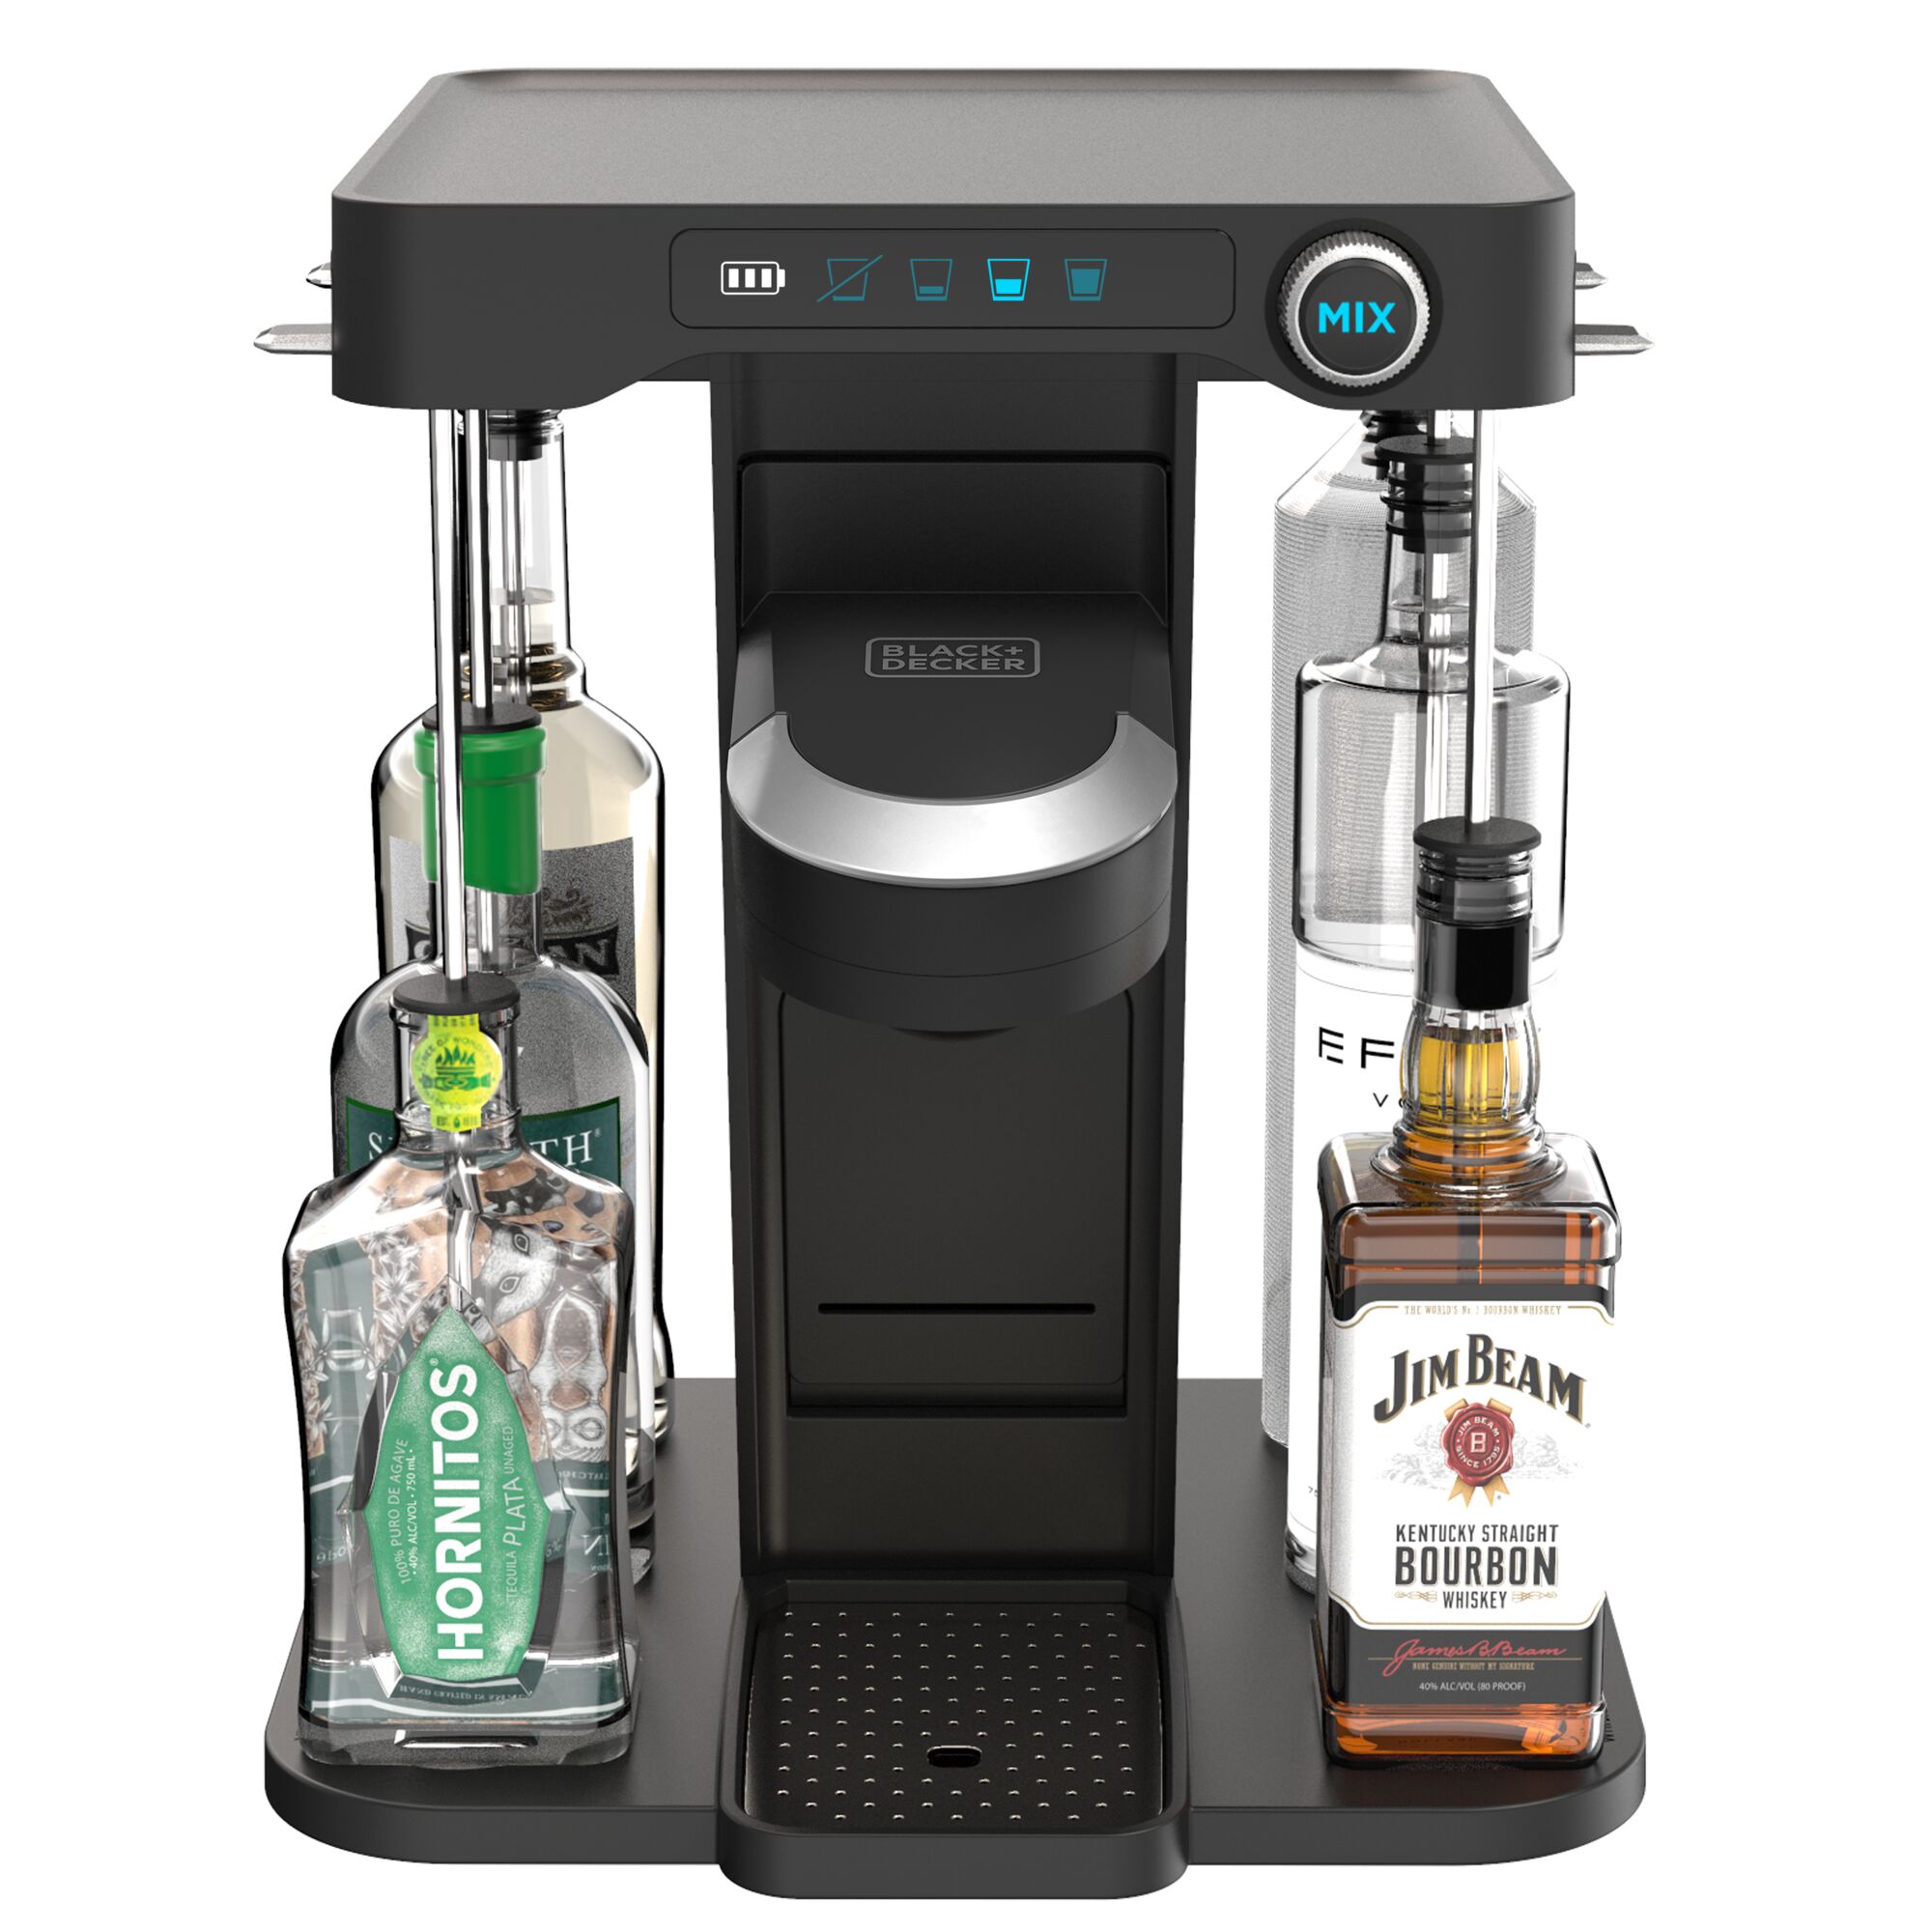 overhead front view of bev by BLACK+DECKER(TM) cordless cocktail maker wth with Jim Beam brand liquor bottles and blue LEDs illuminated underneath